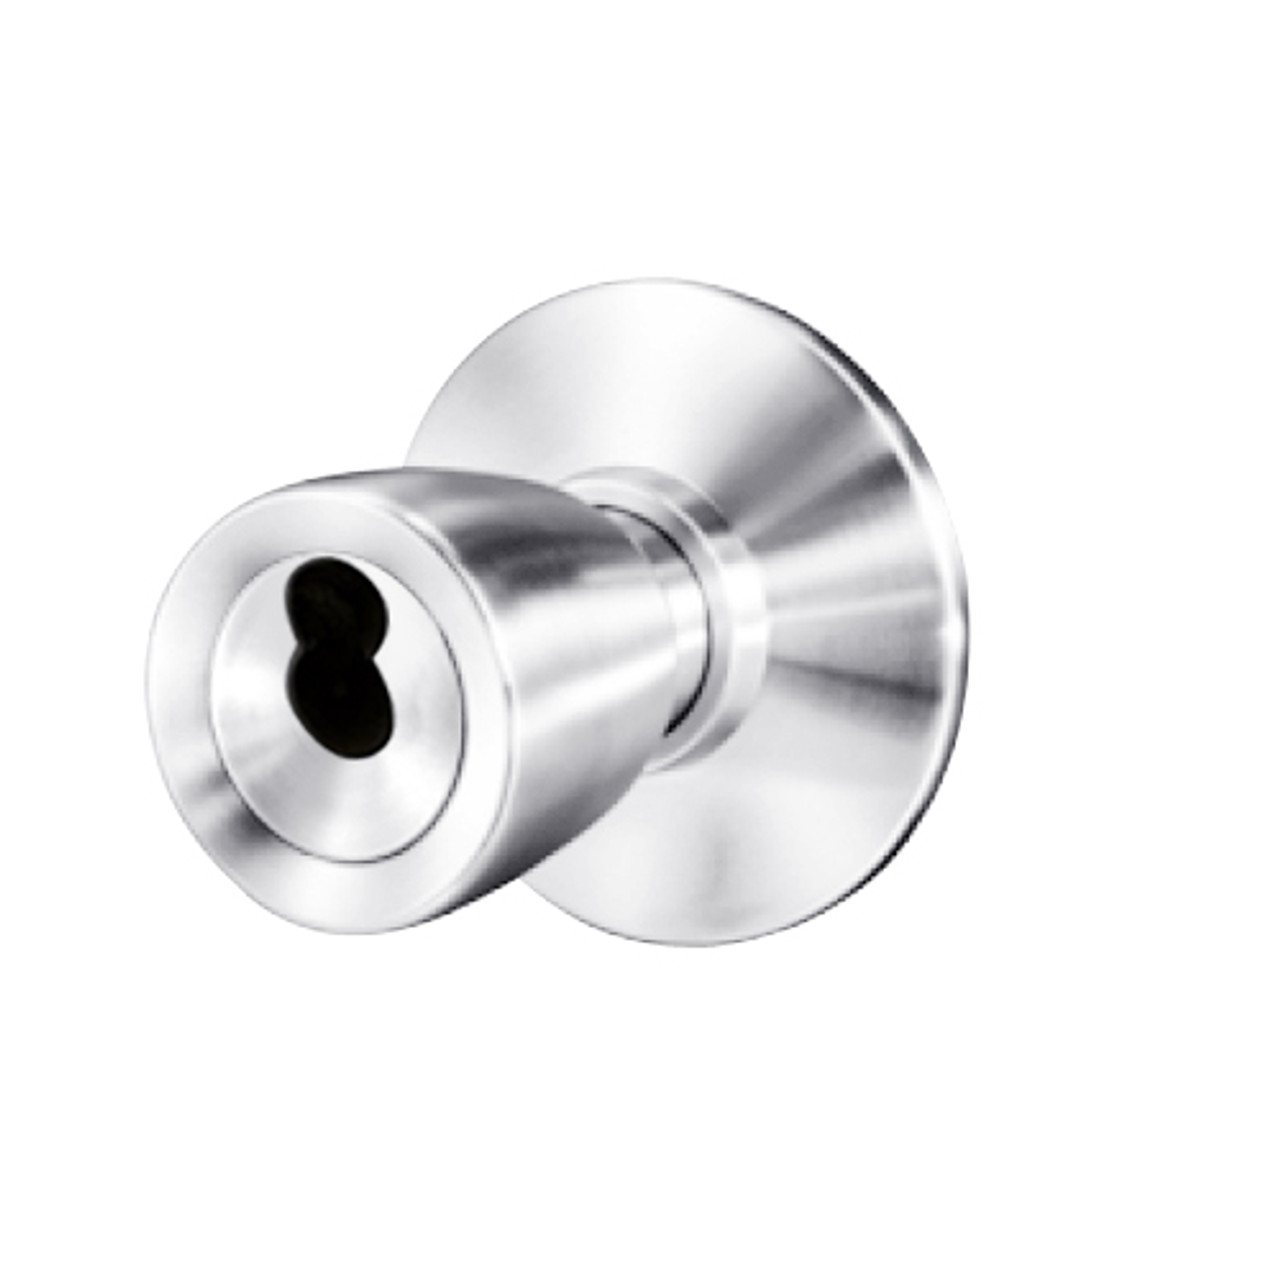 8K37C6DS3625 Best 8K Series Apartment Heavy Duty Cylindrical Knob Locks with Tulip Style in Bright Chrome